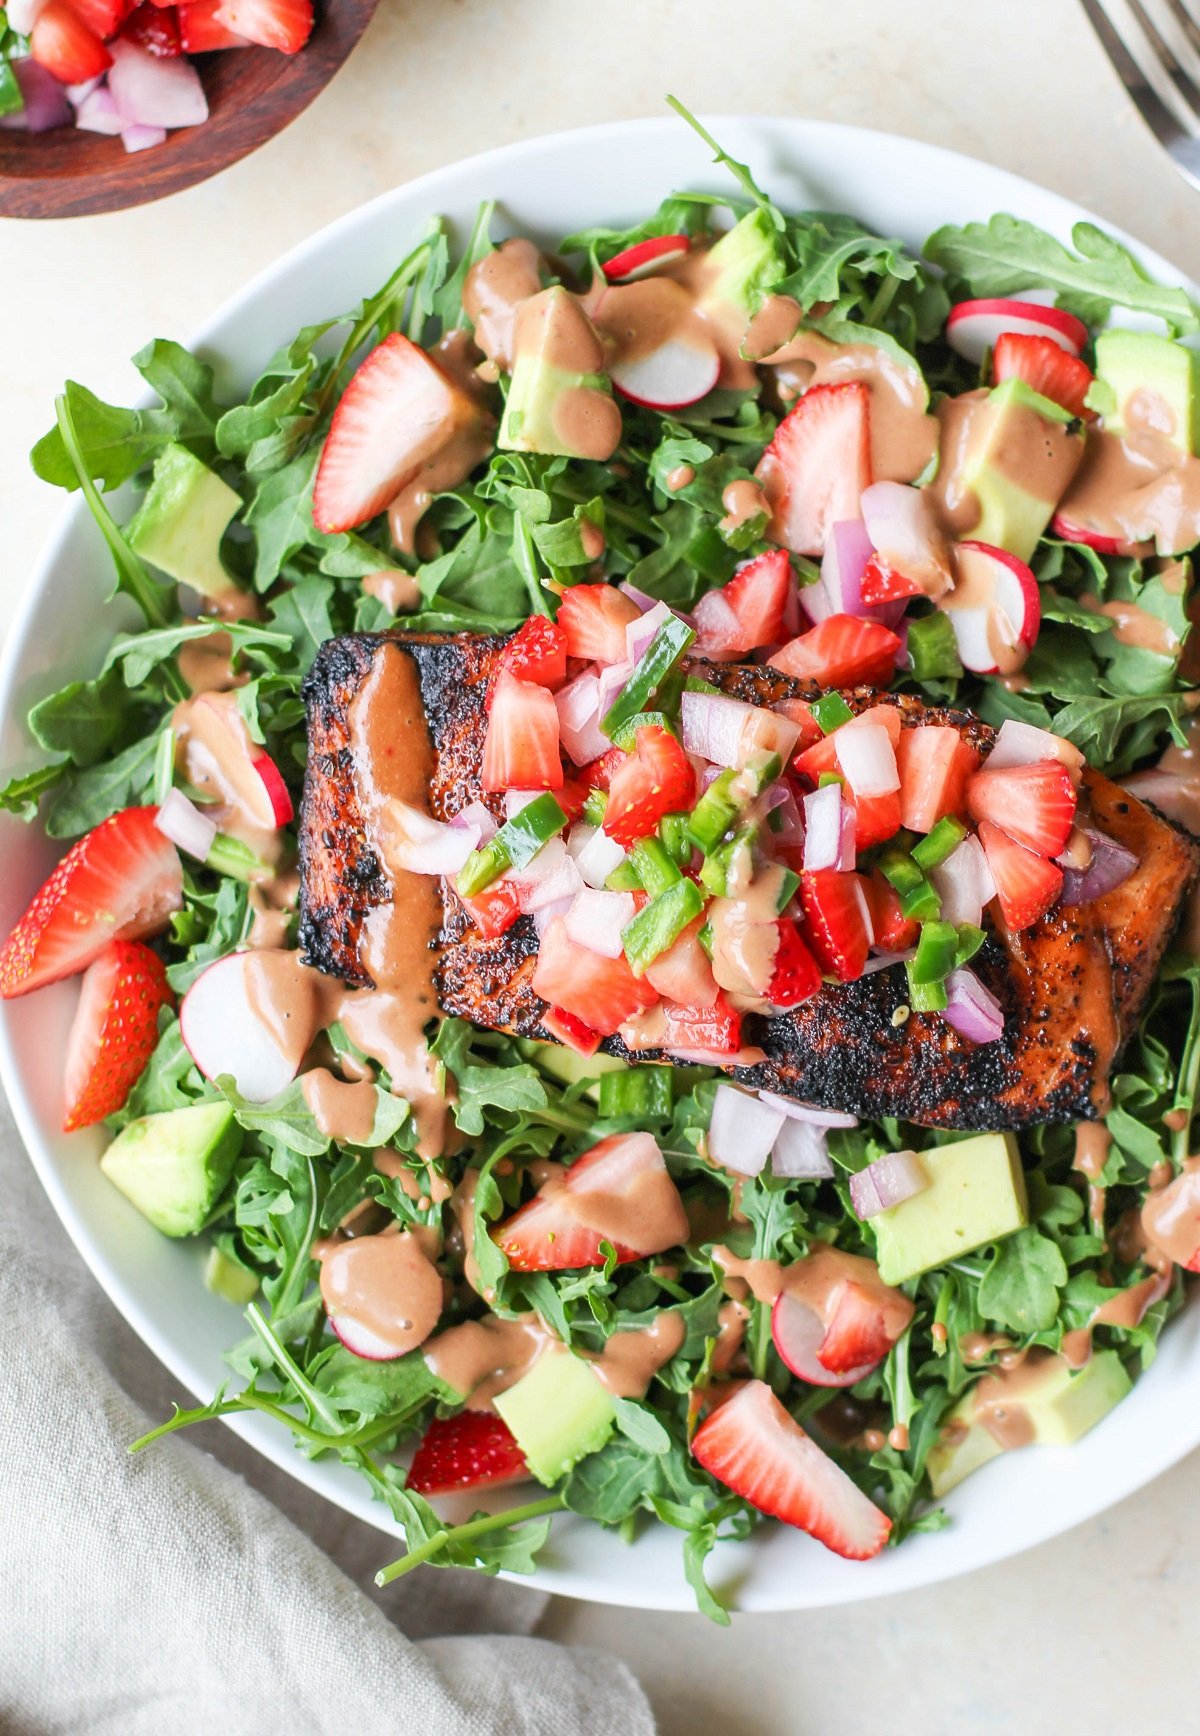 White bowl of grilled salmon and salad with dressing drizzled on top, ready to eat.